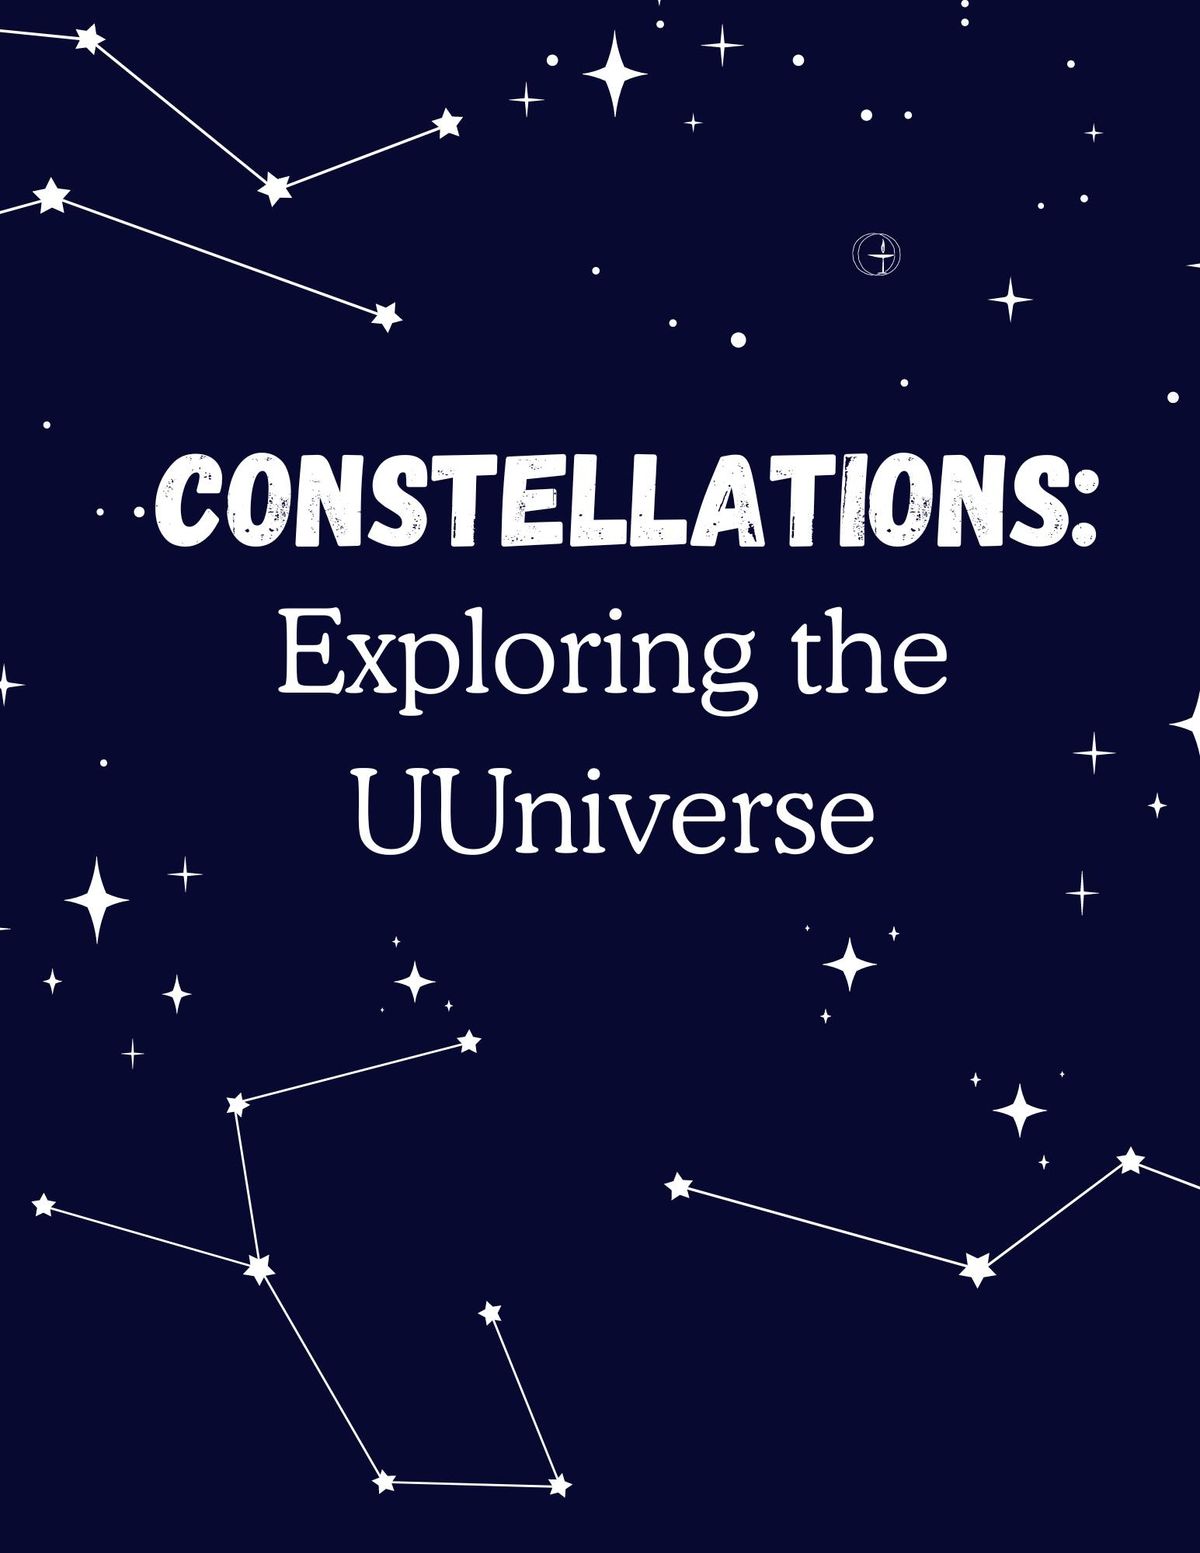 CanUUdle XXIV: CONstellations - Exploring the UUniverse